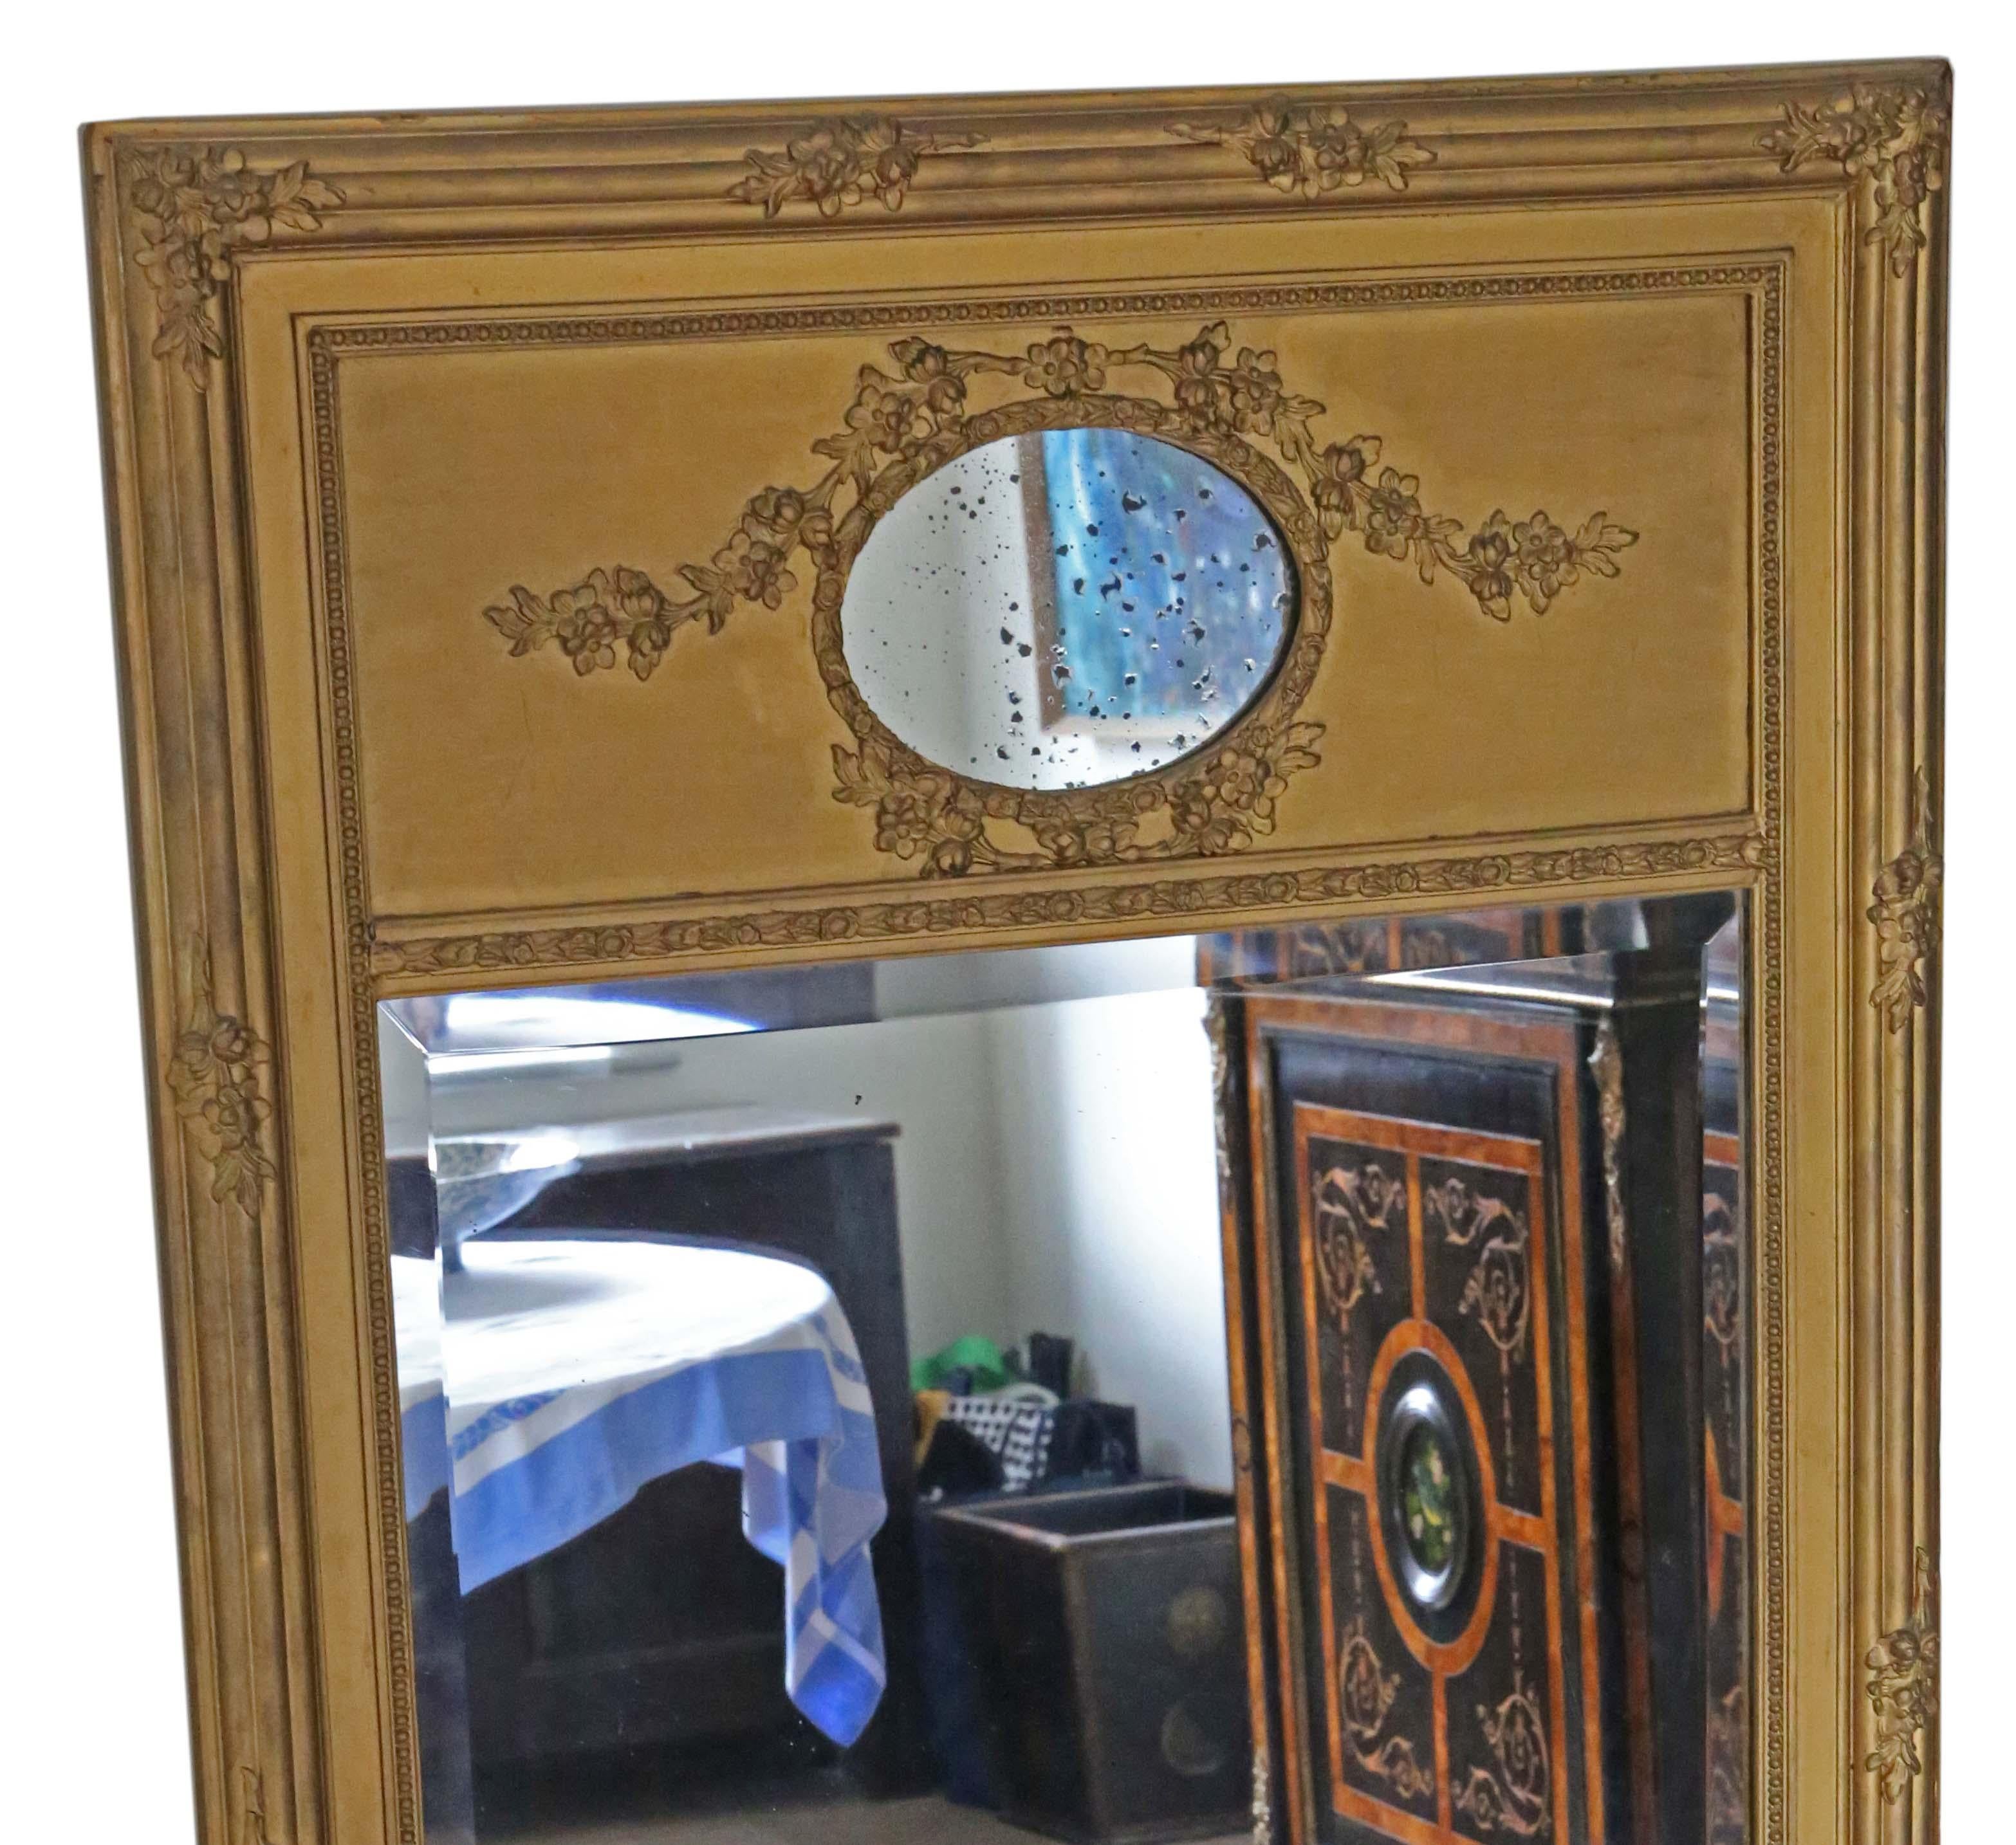 Antique C1900 Large Quality Gilt Floor Wall Overmantle Trumeau Mirror In Good Condition For Sale In Wisbech, Cambridgeshire